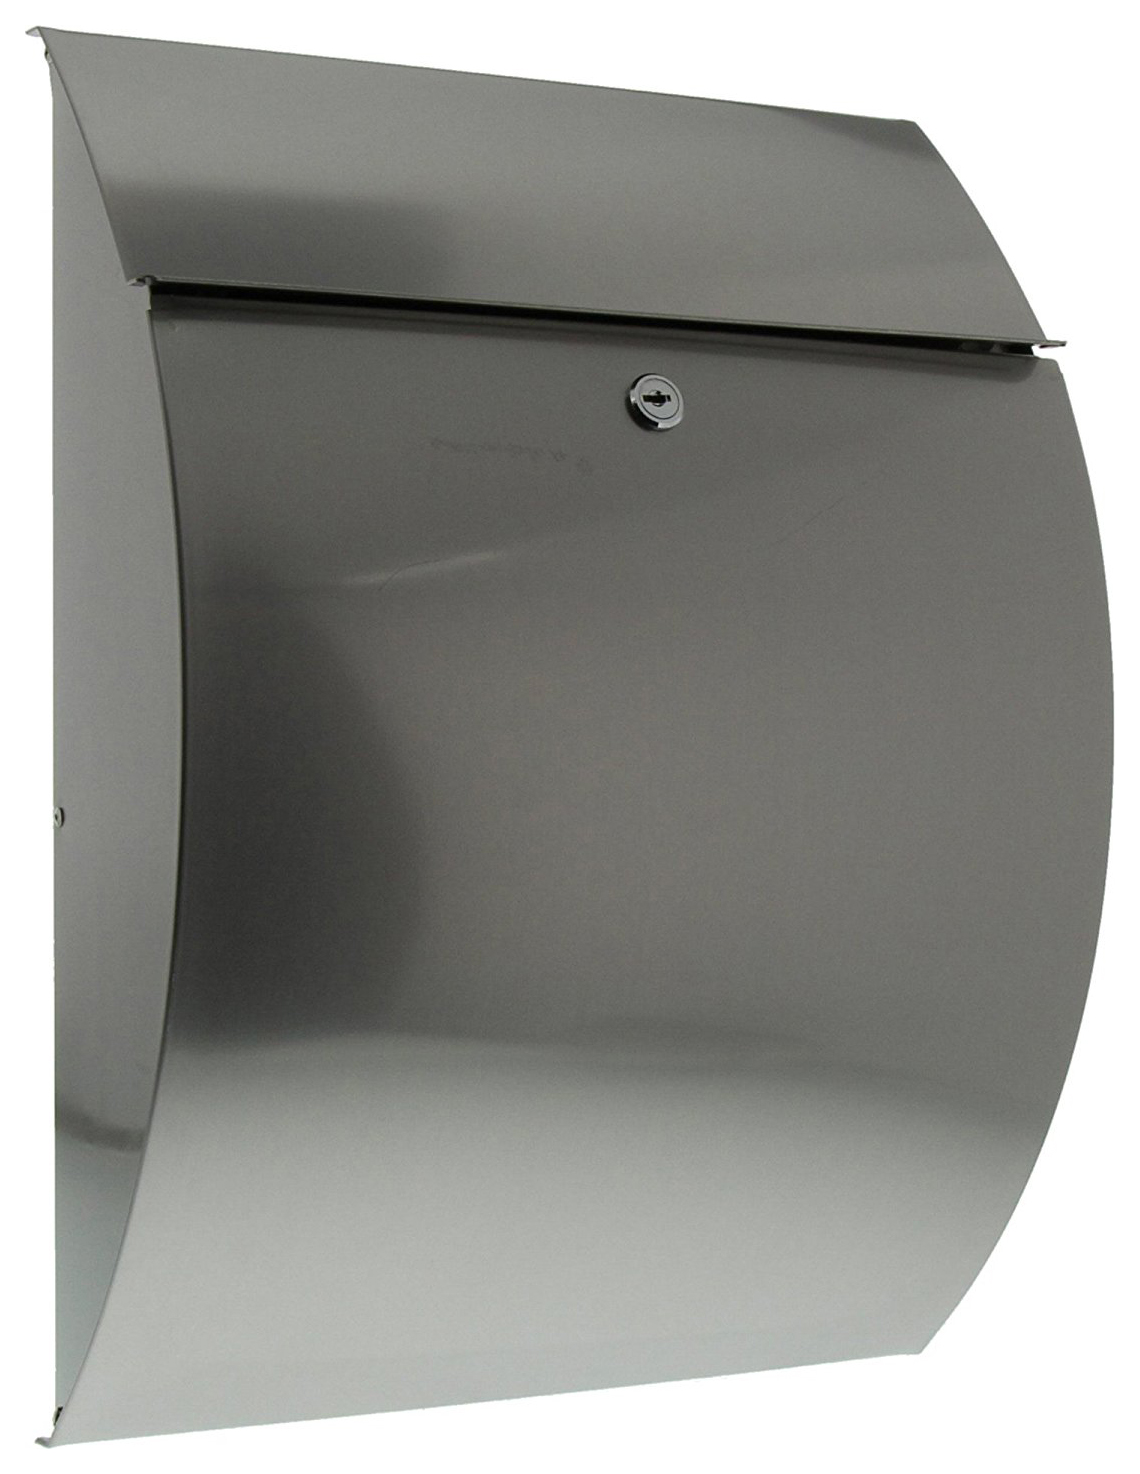 Burg-Wachter Stainless Steel Riviera Wall Mounted Postbox - 460 x 335 x 130mm